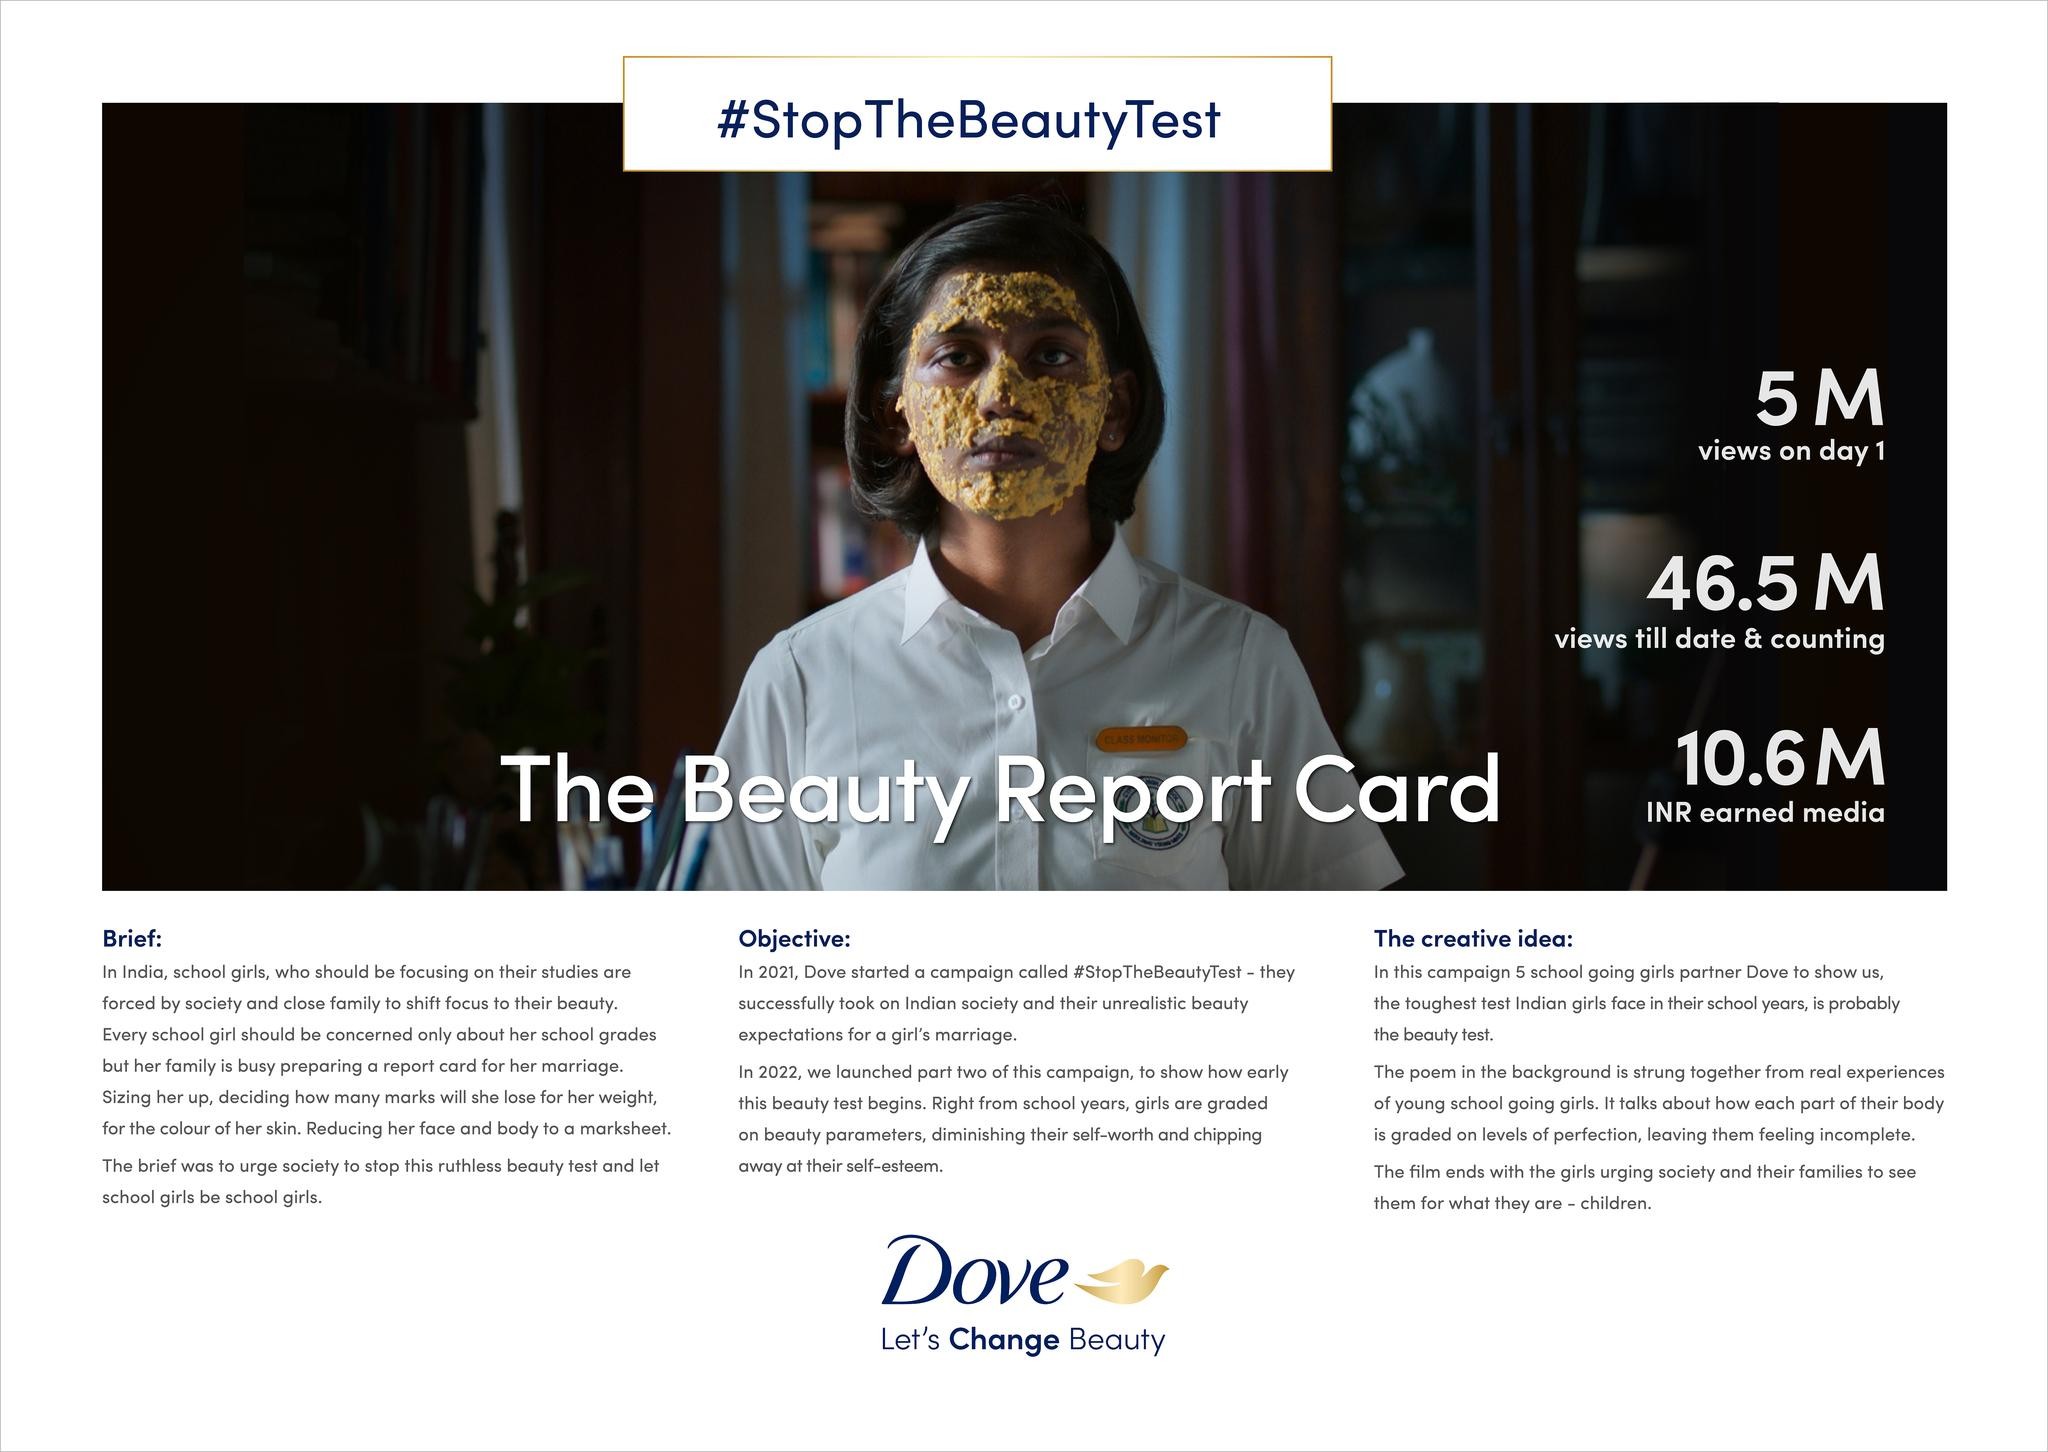 DOVE - THE BEAUTY REPORT CARD #STOPTHEBEAUTYTEST